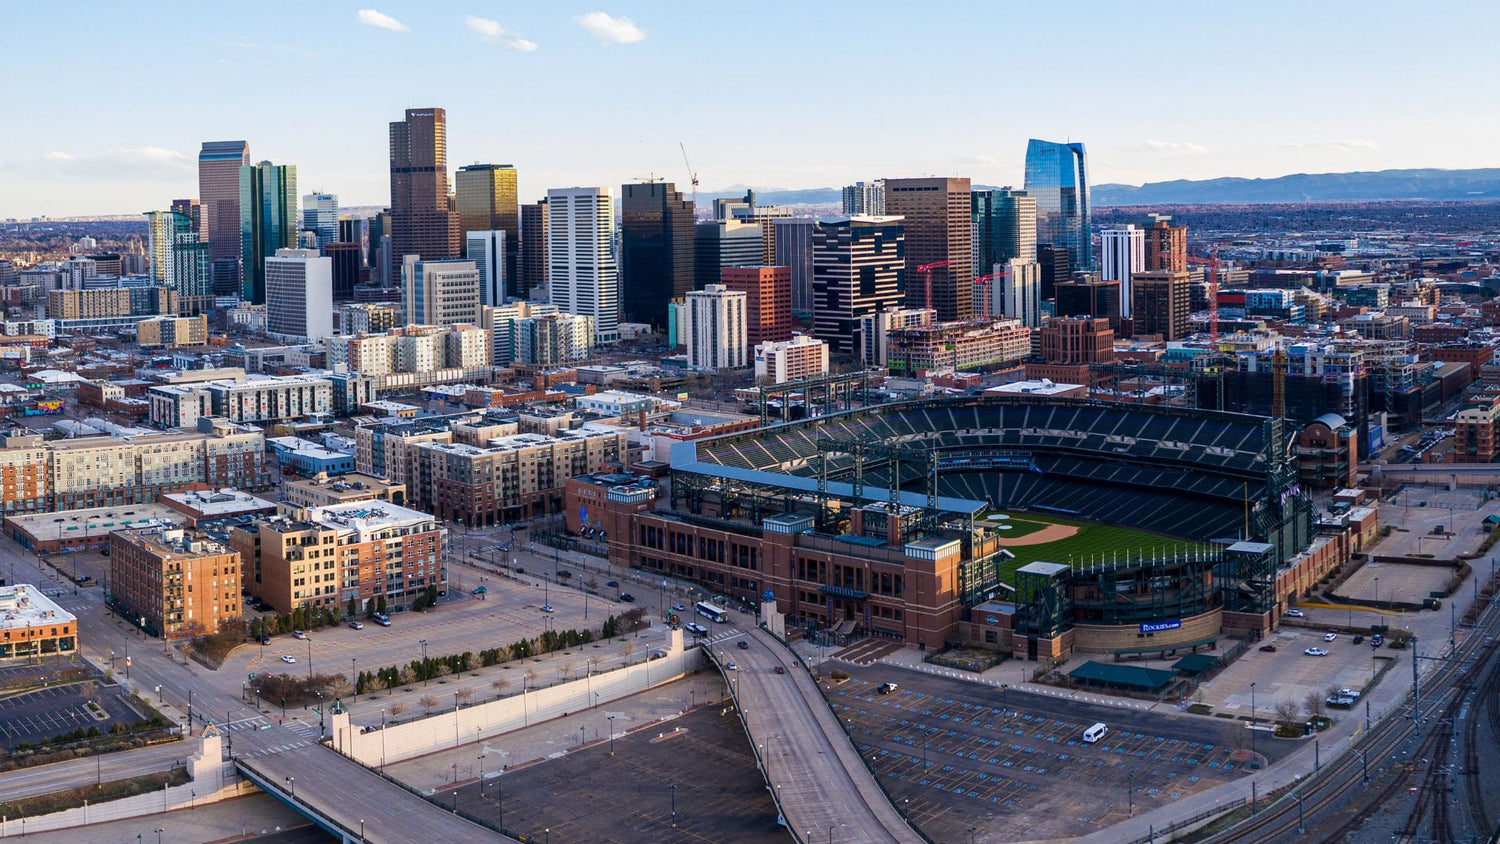 Aerial view of Denver, CO including Coors Field. - History By Mail